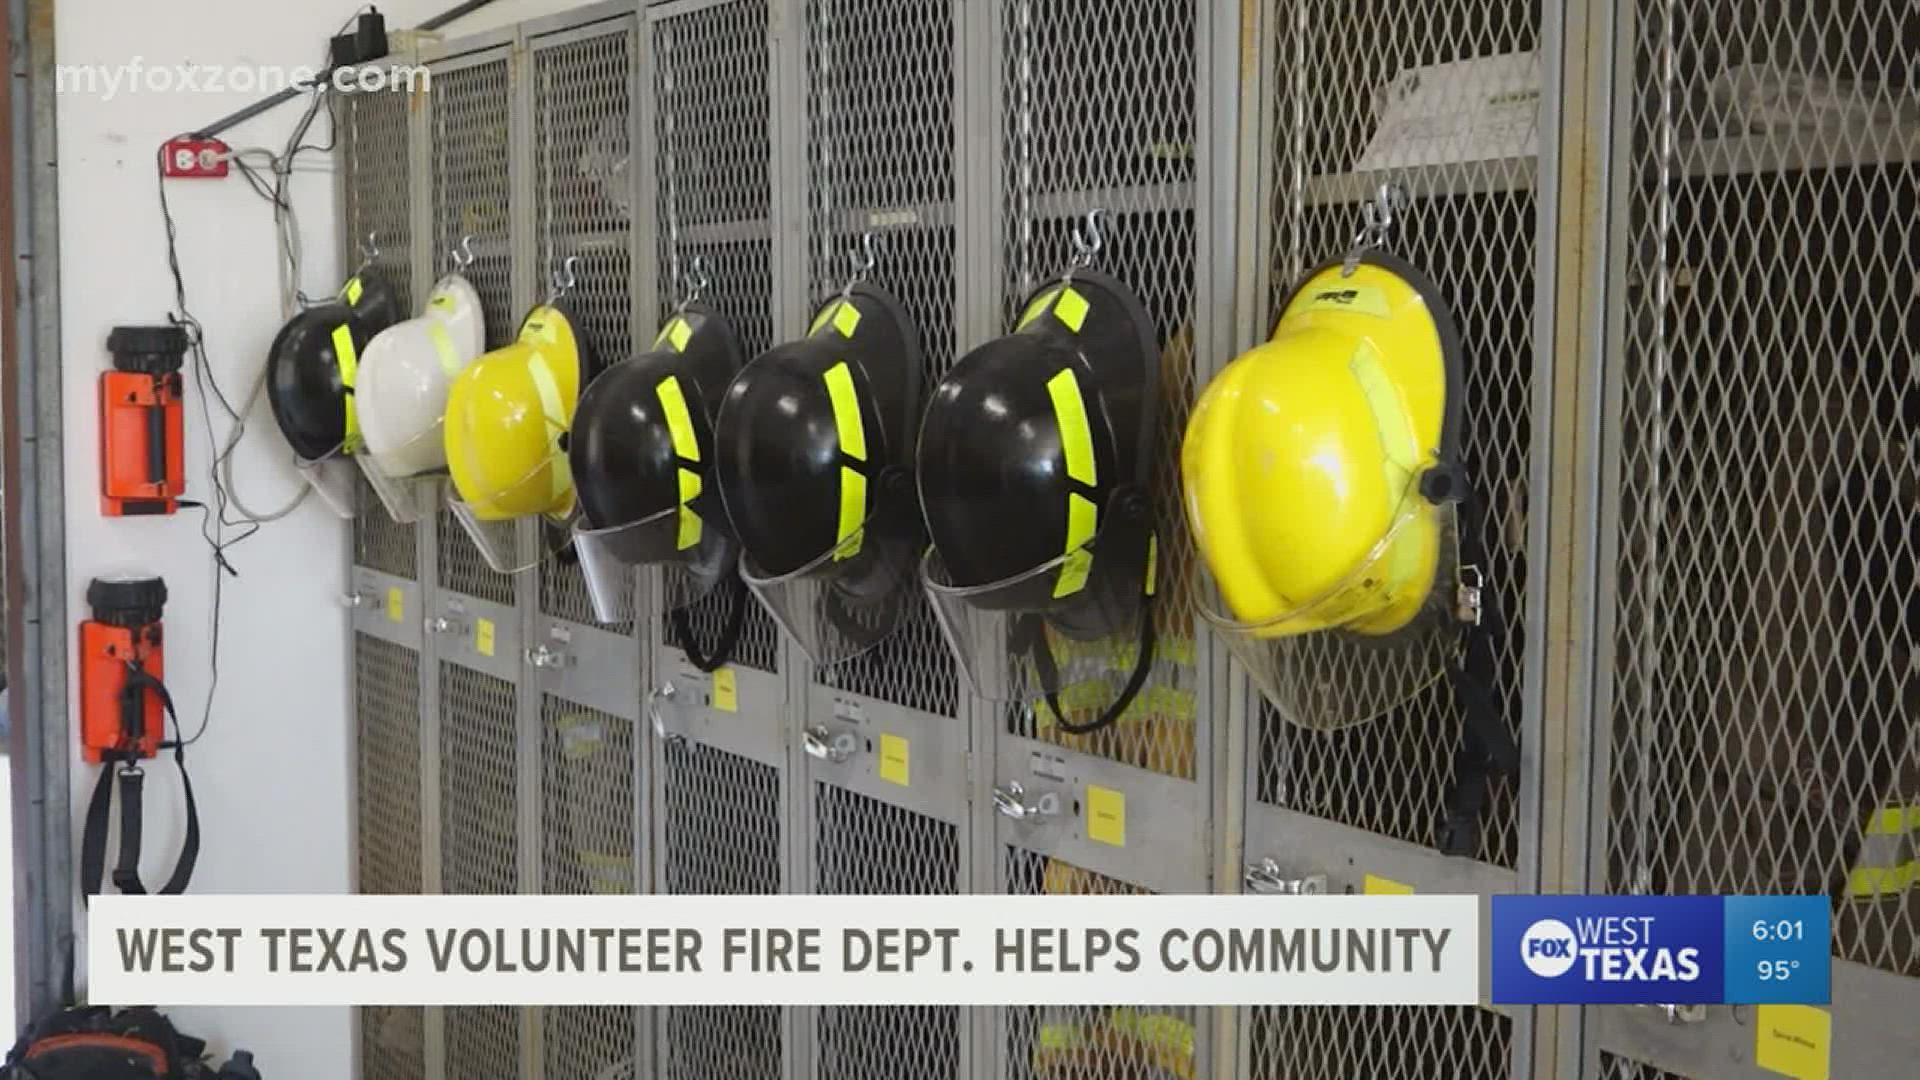 With recent wildfires across Texas, local emergency and volunteer fire departments have stayed busy.